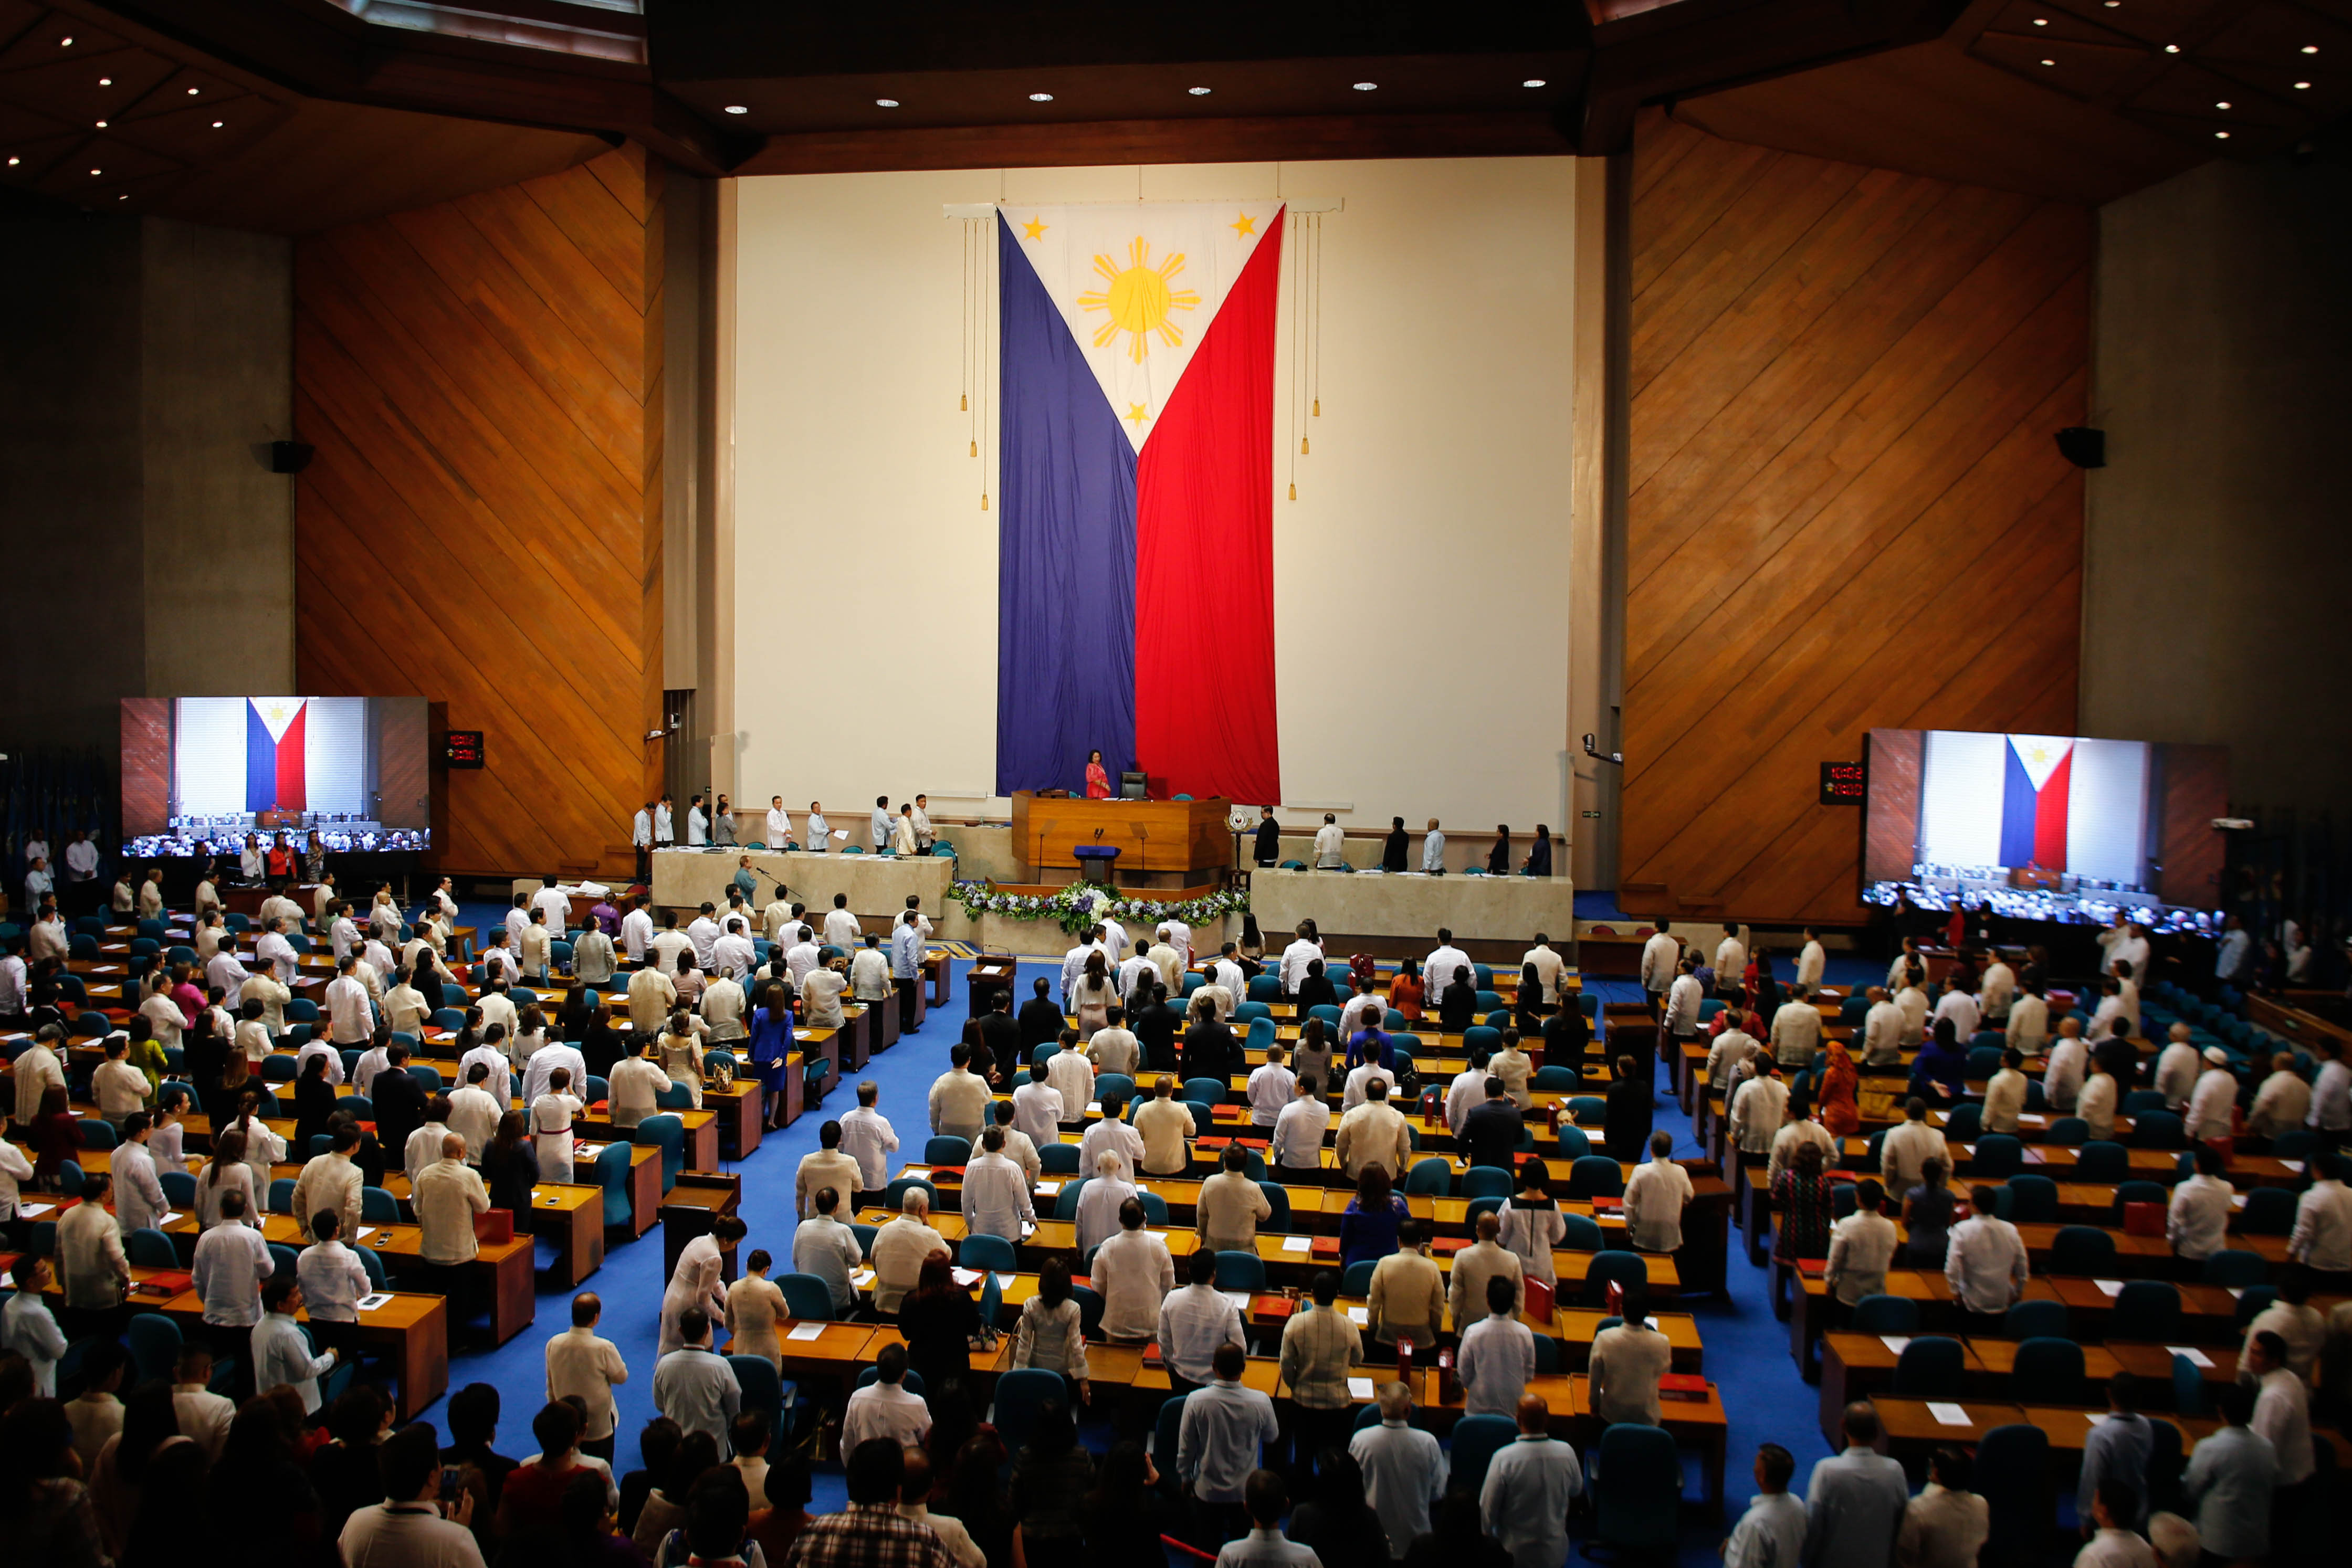 Members of the Philippine Congress sing the Philippine National Anthem during the opening session prior to The State of the Nation Address of President Duterte at the Philippine Congress building in Quezon City, 25 July 2016. Mark Cristino/EPA 